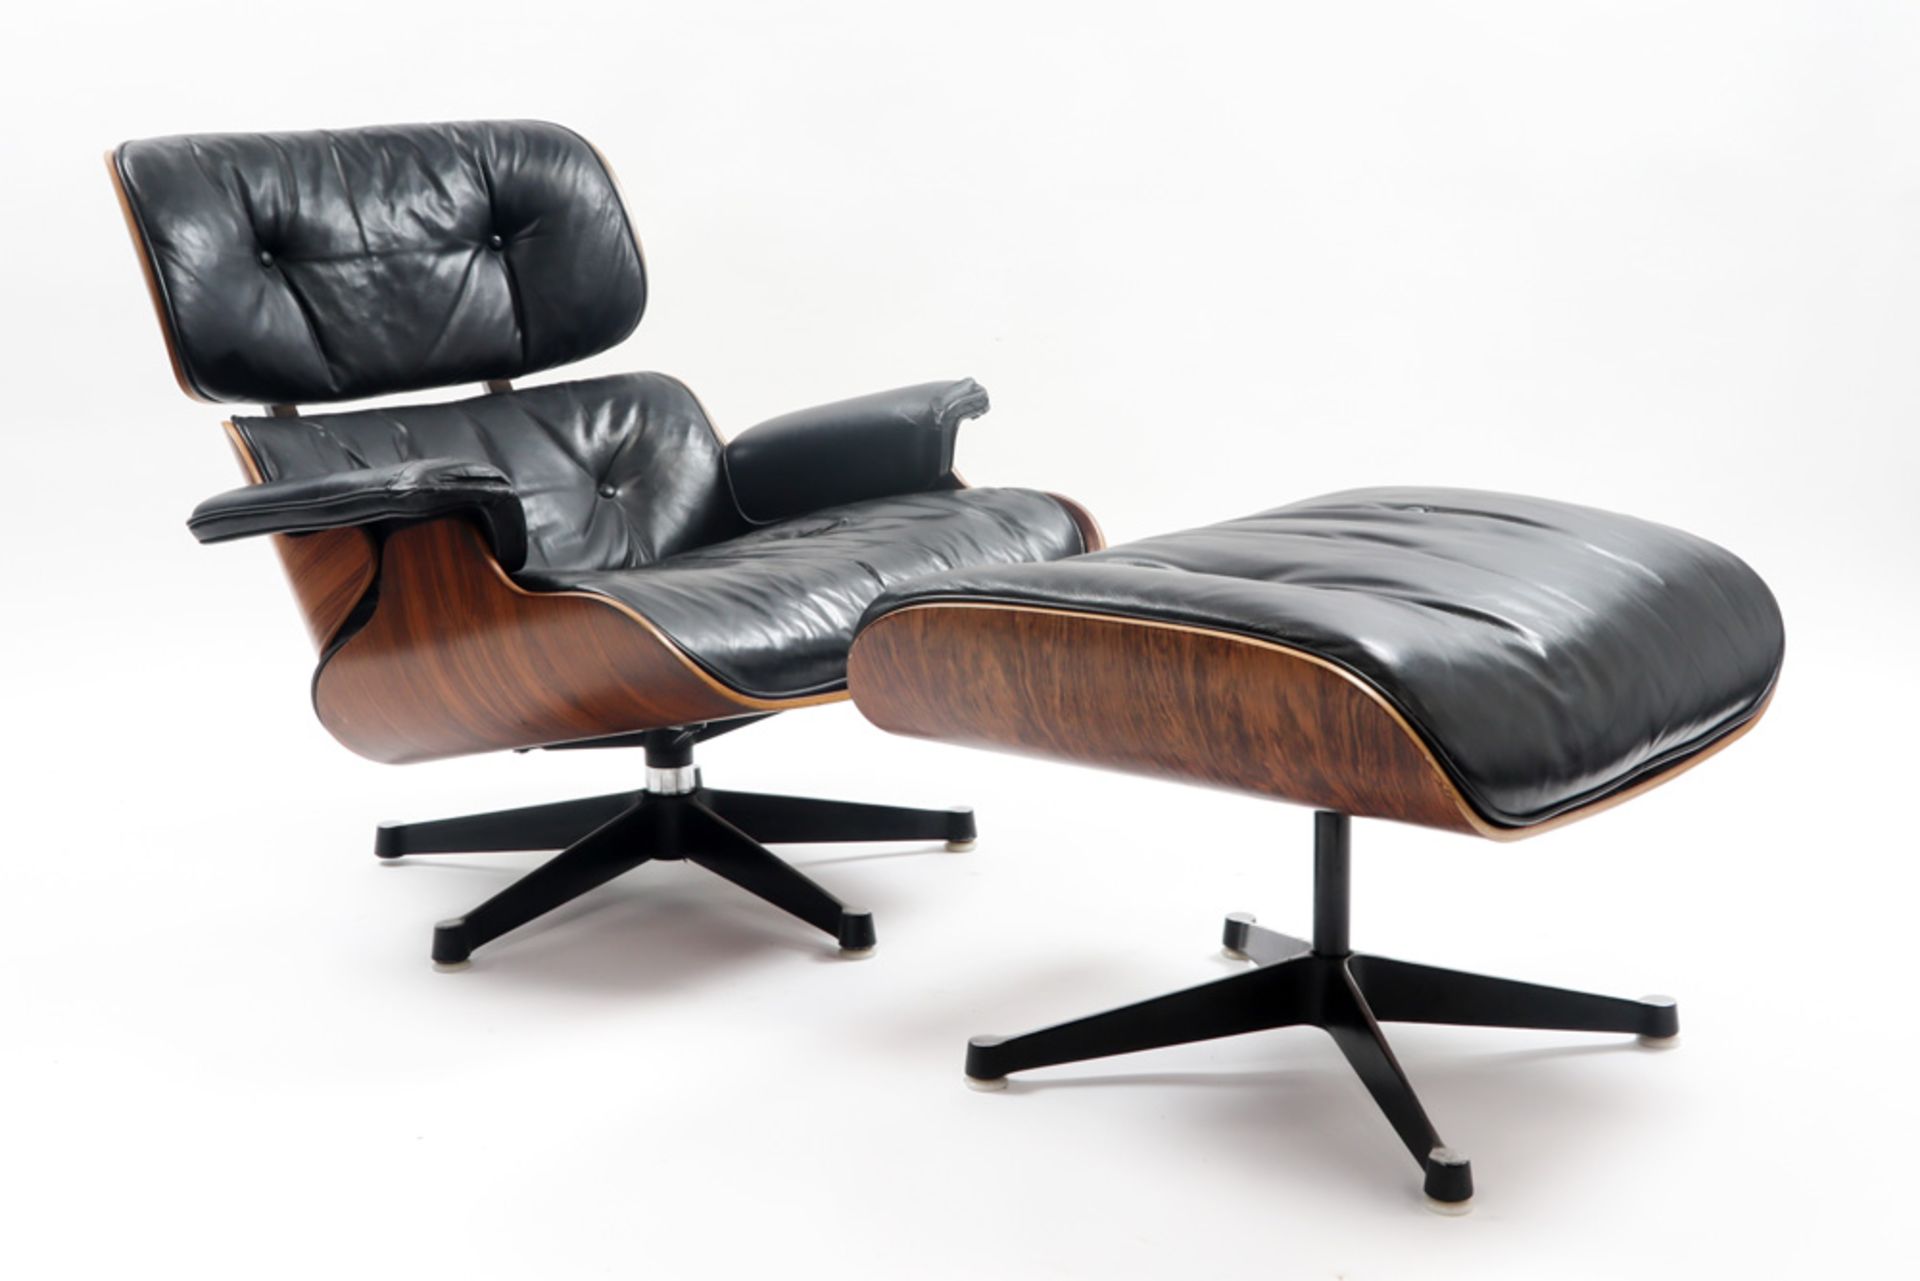 Charles Eames "Henry Miller" marked set of lounge chair and ottoman in plywood and black leather and - Bild 2 aus 4